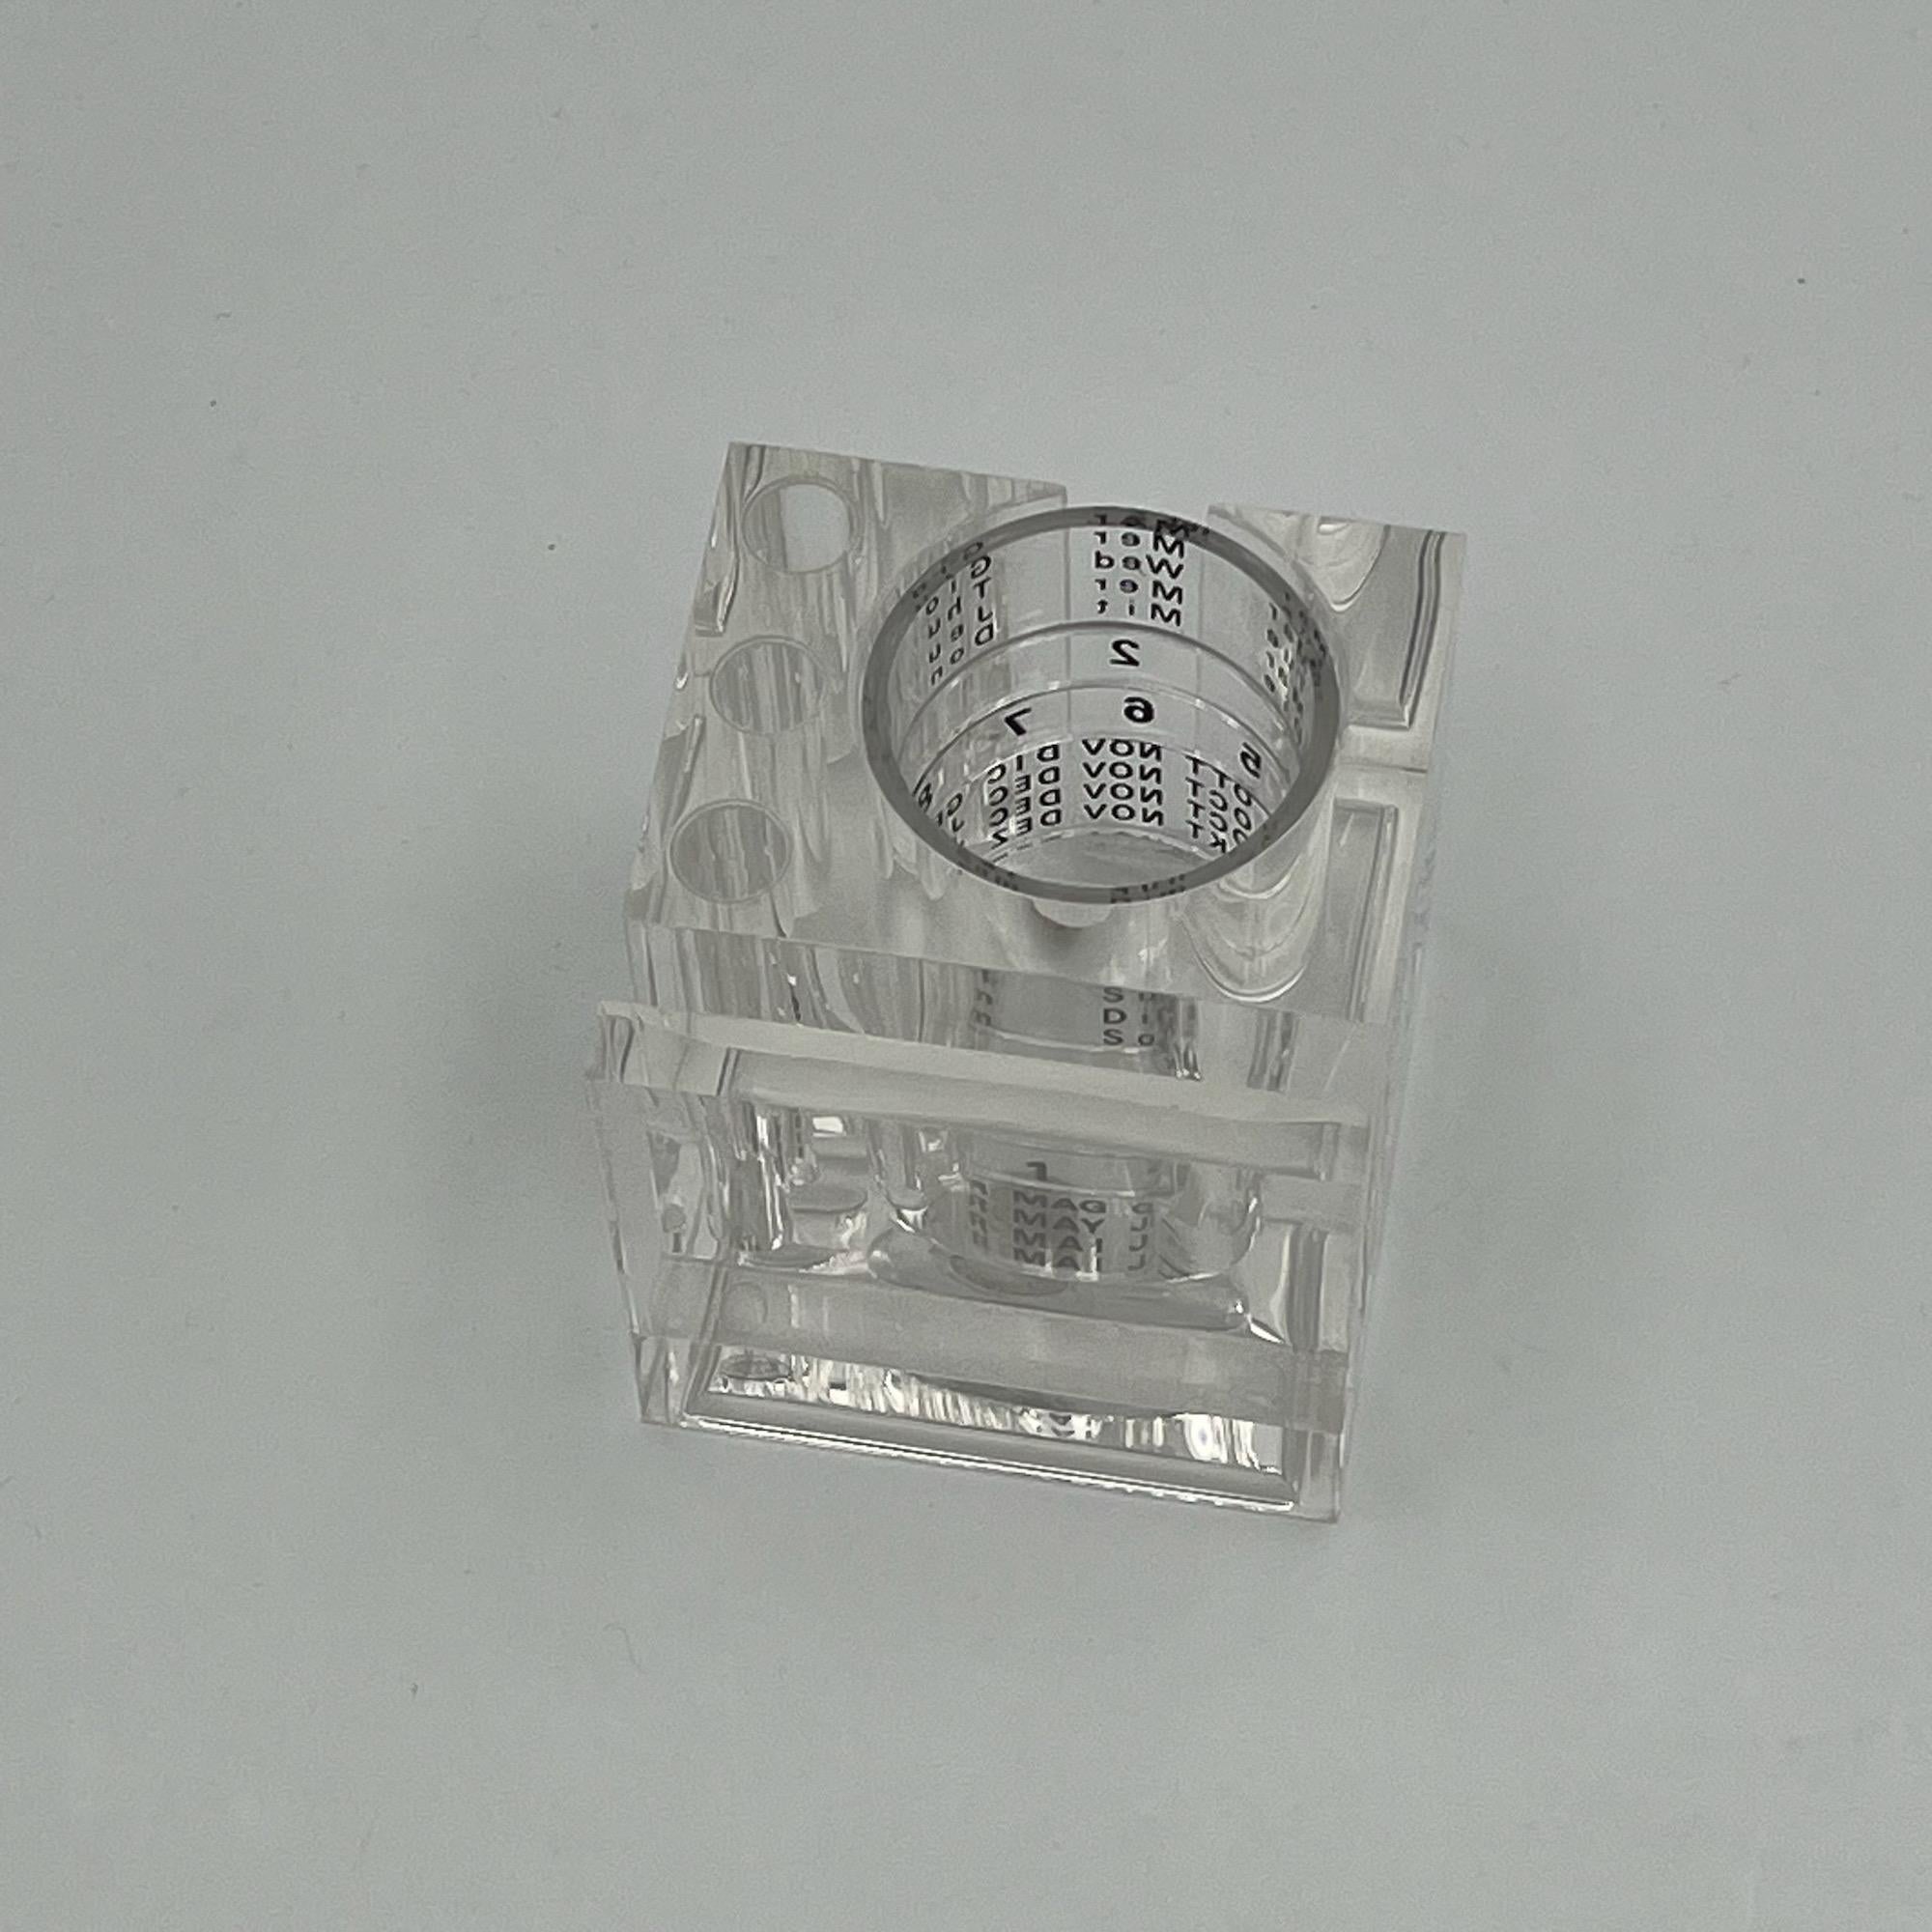 Stylish desk organizer with perpetual calendar made of plexiglass, designed by Fabio Manlio Ciocca and produced by Guzzini in the 80s.

This lovely vintage piece has a rigorous square shape that holds an ingenious perpetual calendar, made of four